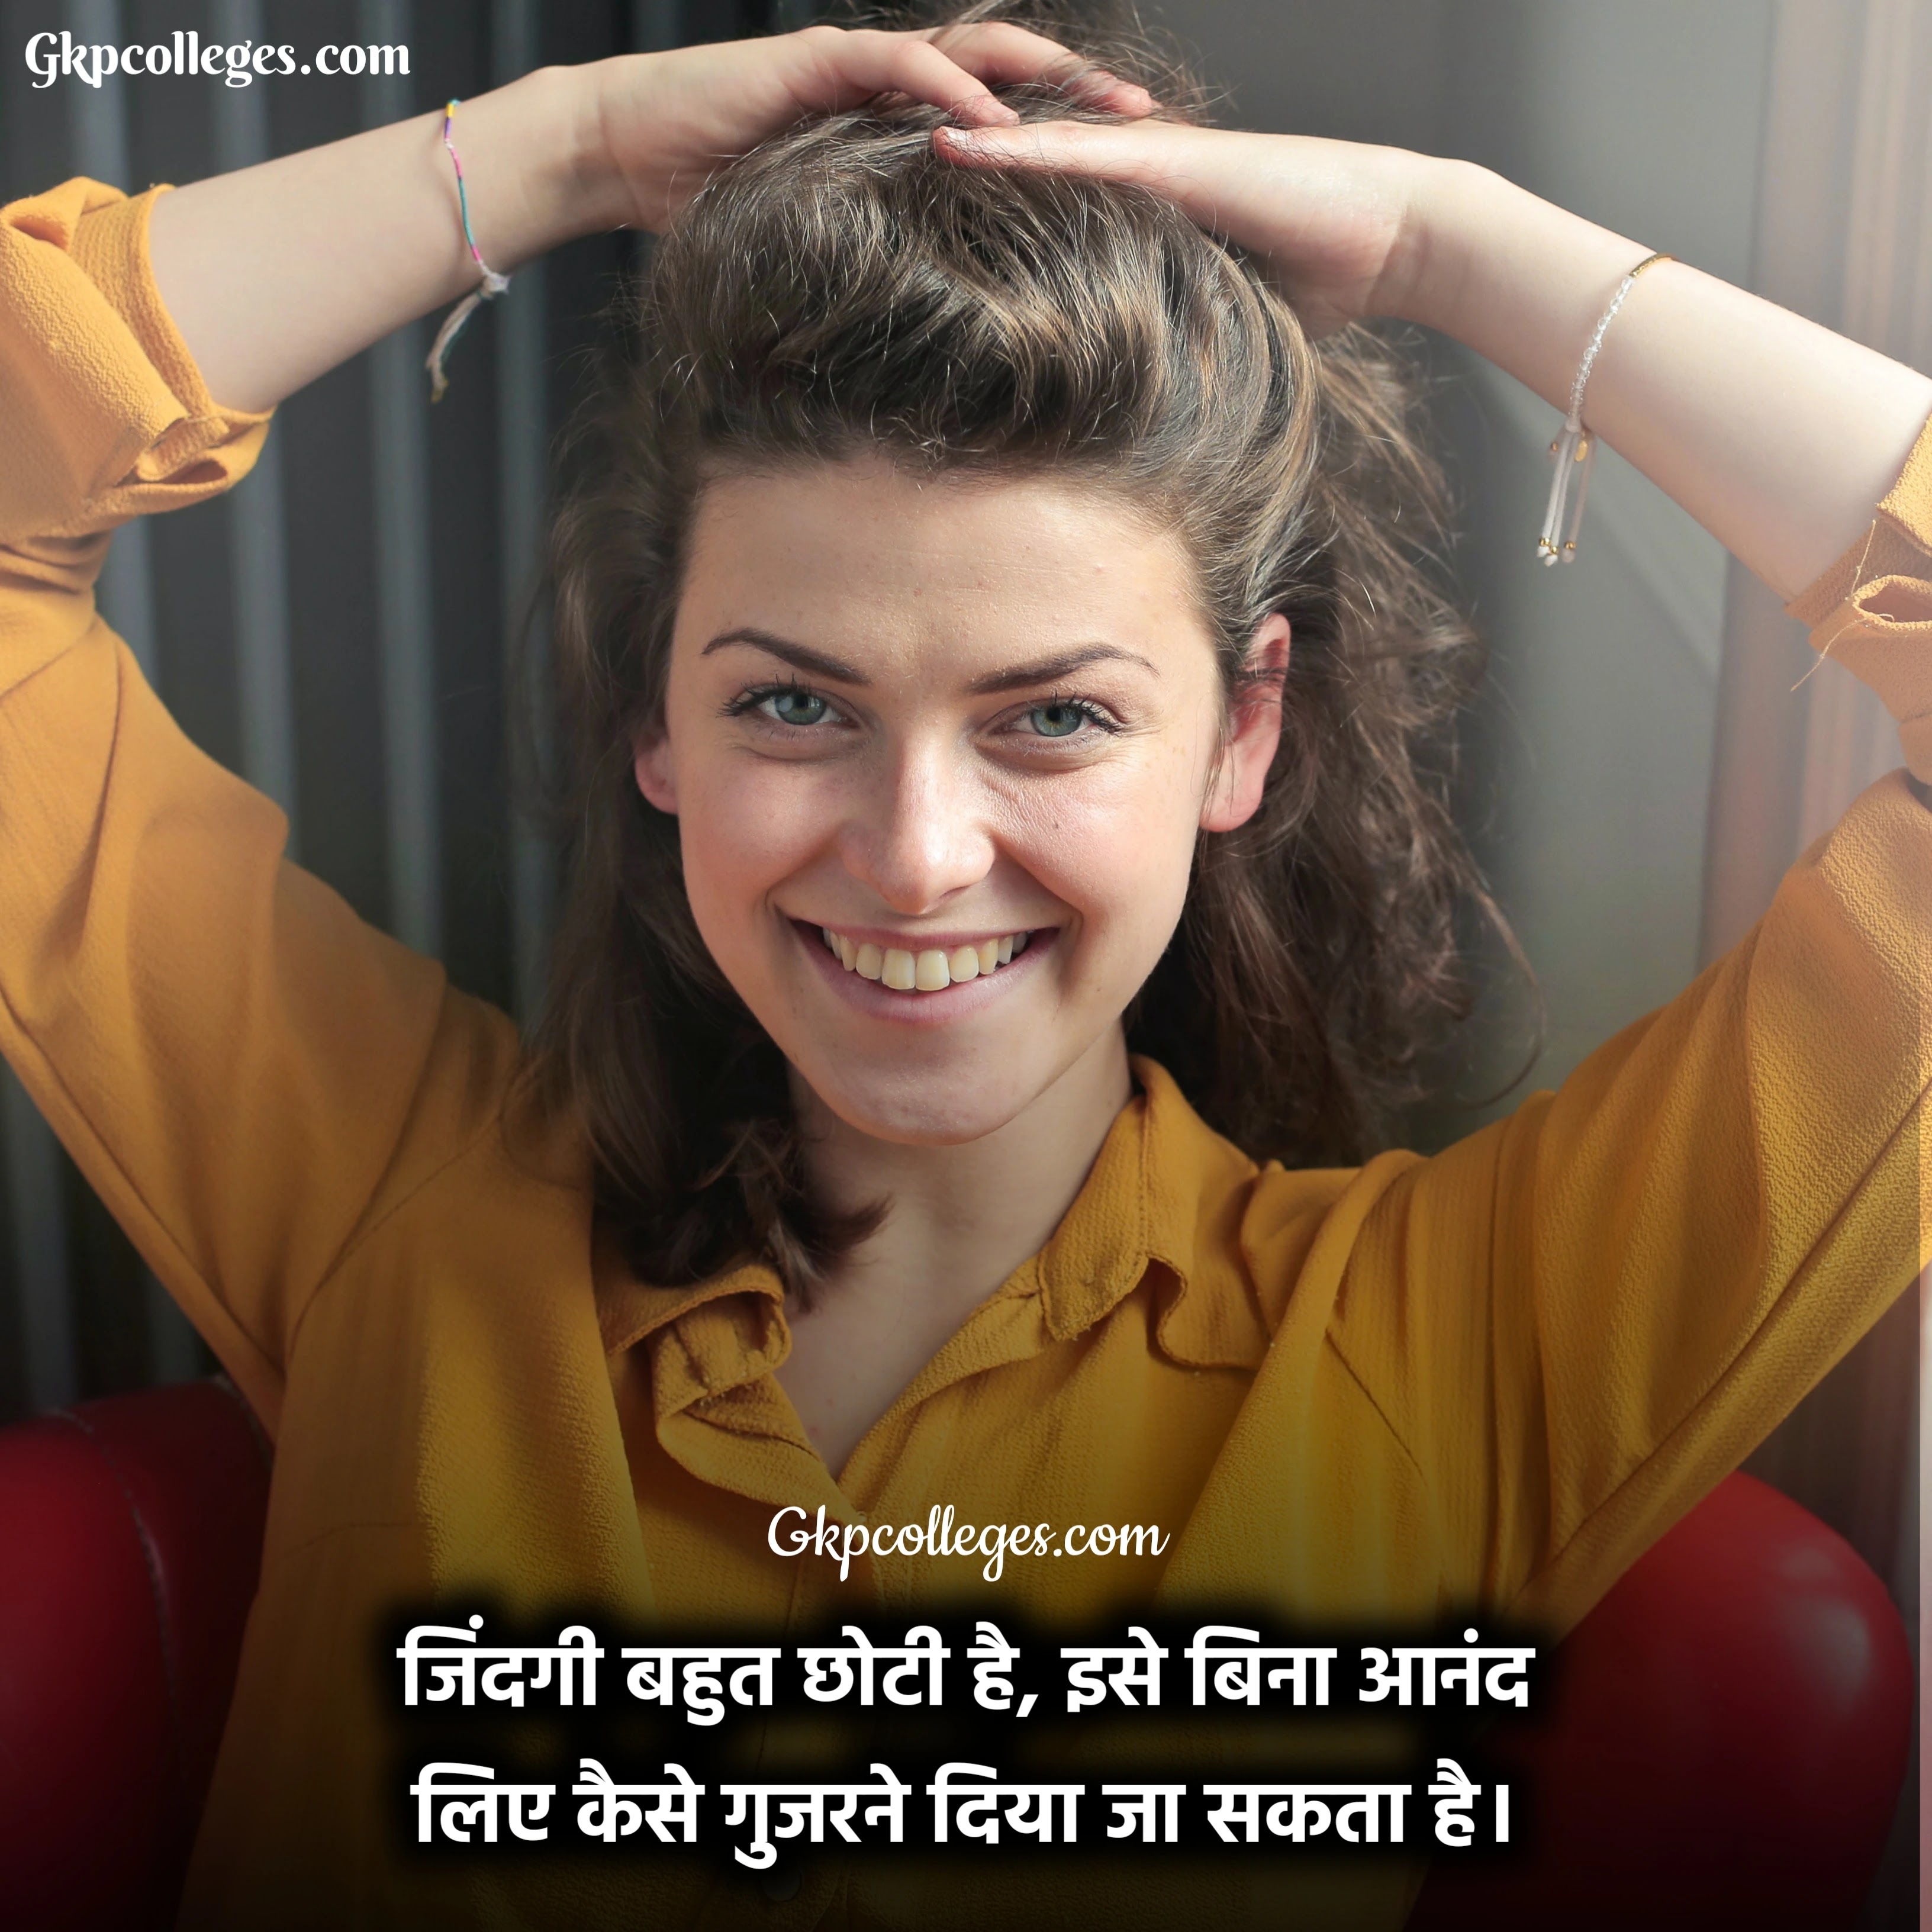 Best Hindi Quotes on Life 1